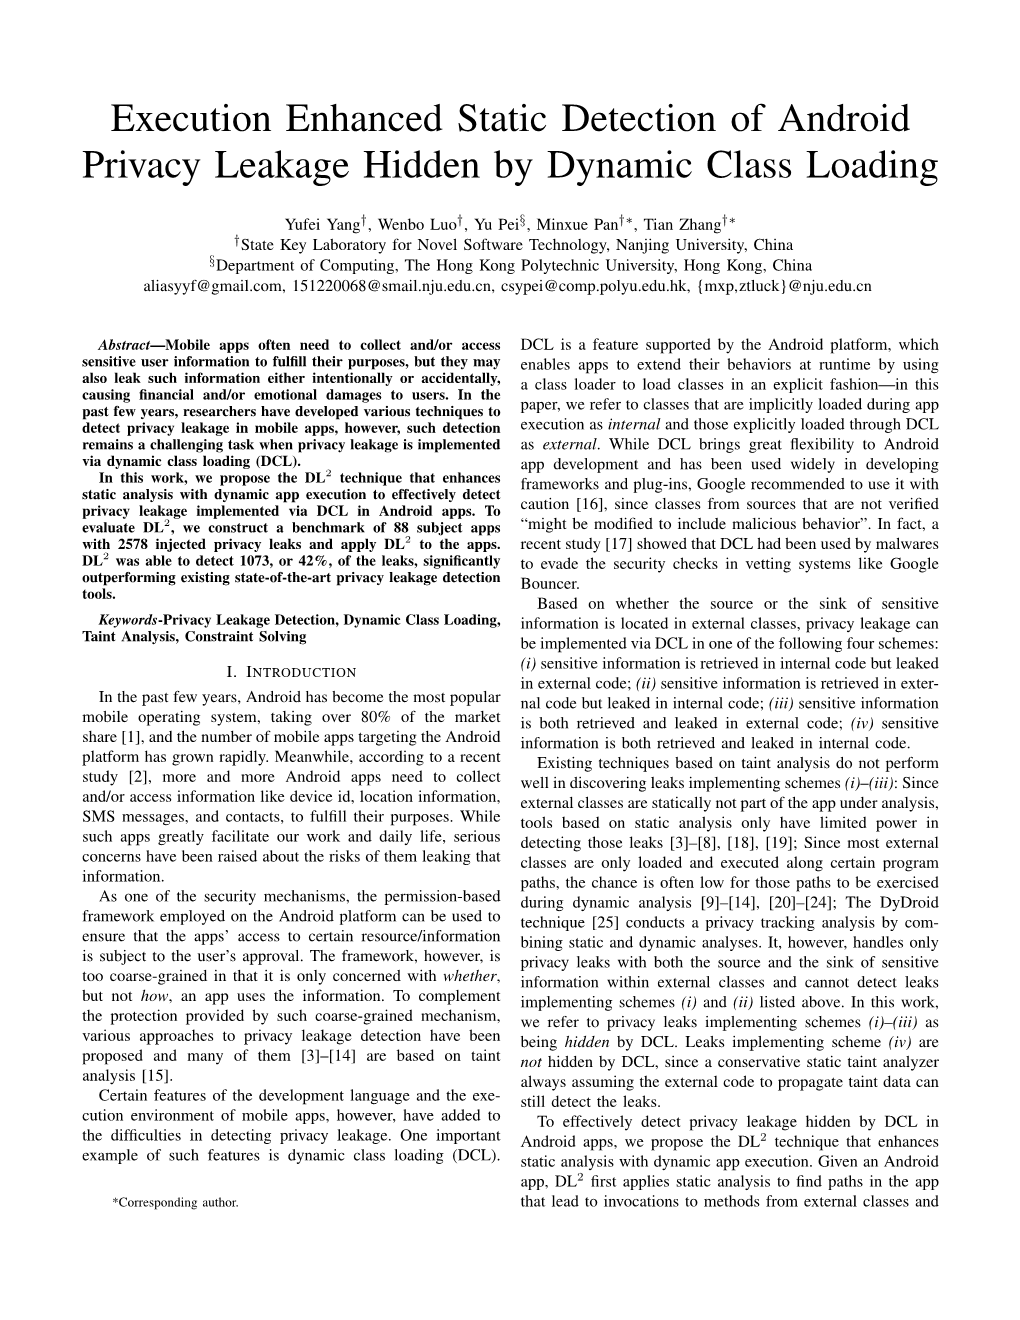 Execution Enhanced Static Detection of Android Privacy Leakage Hidden by Dynamic Class Loading